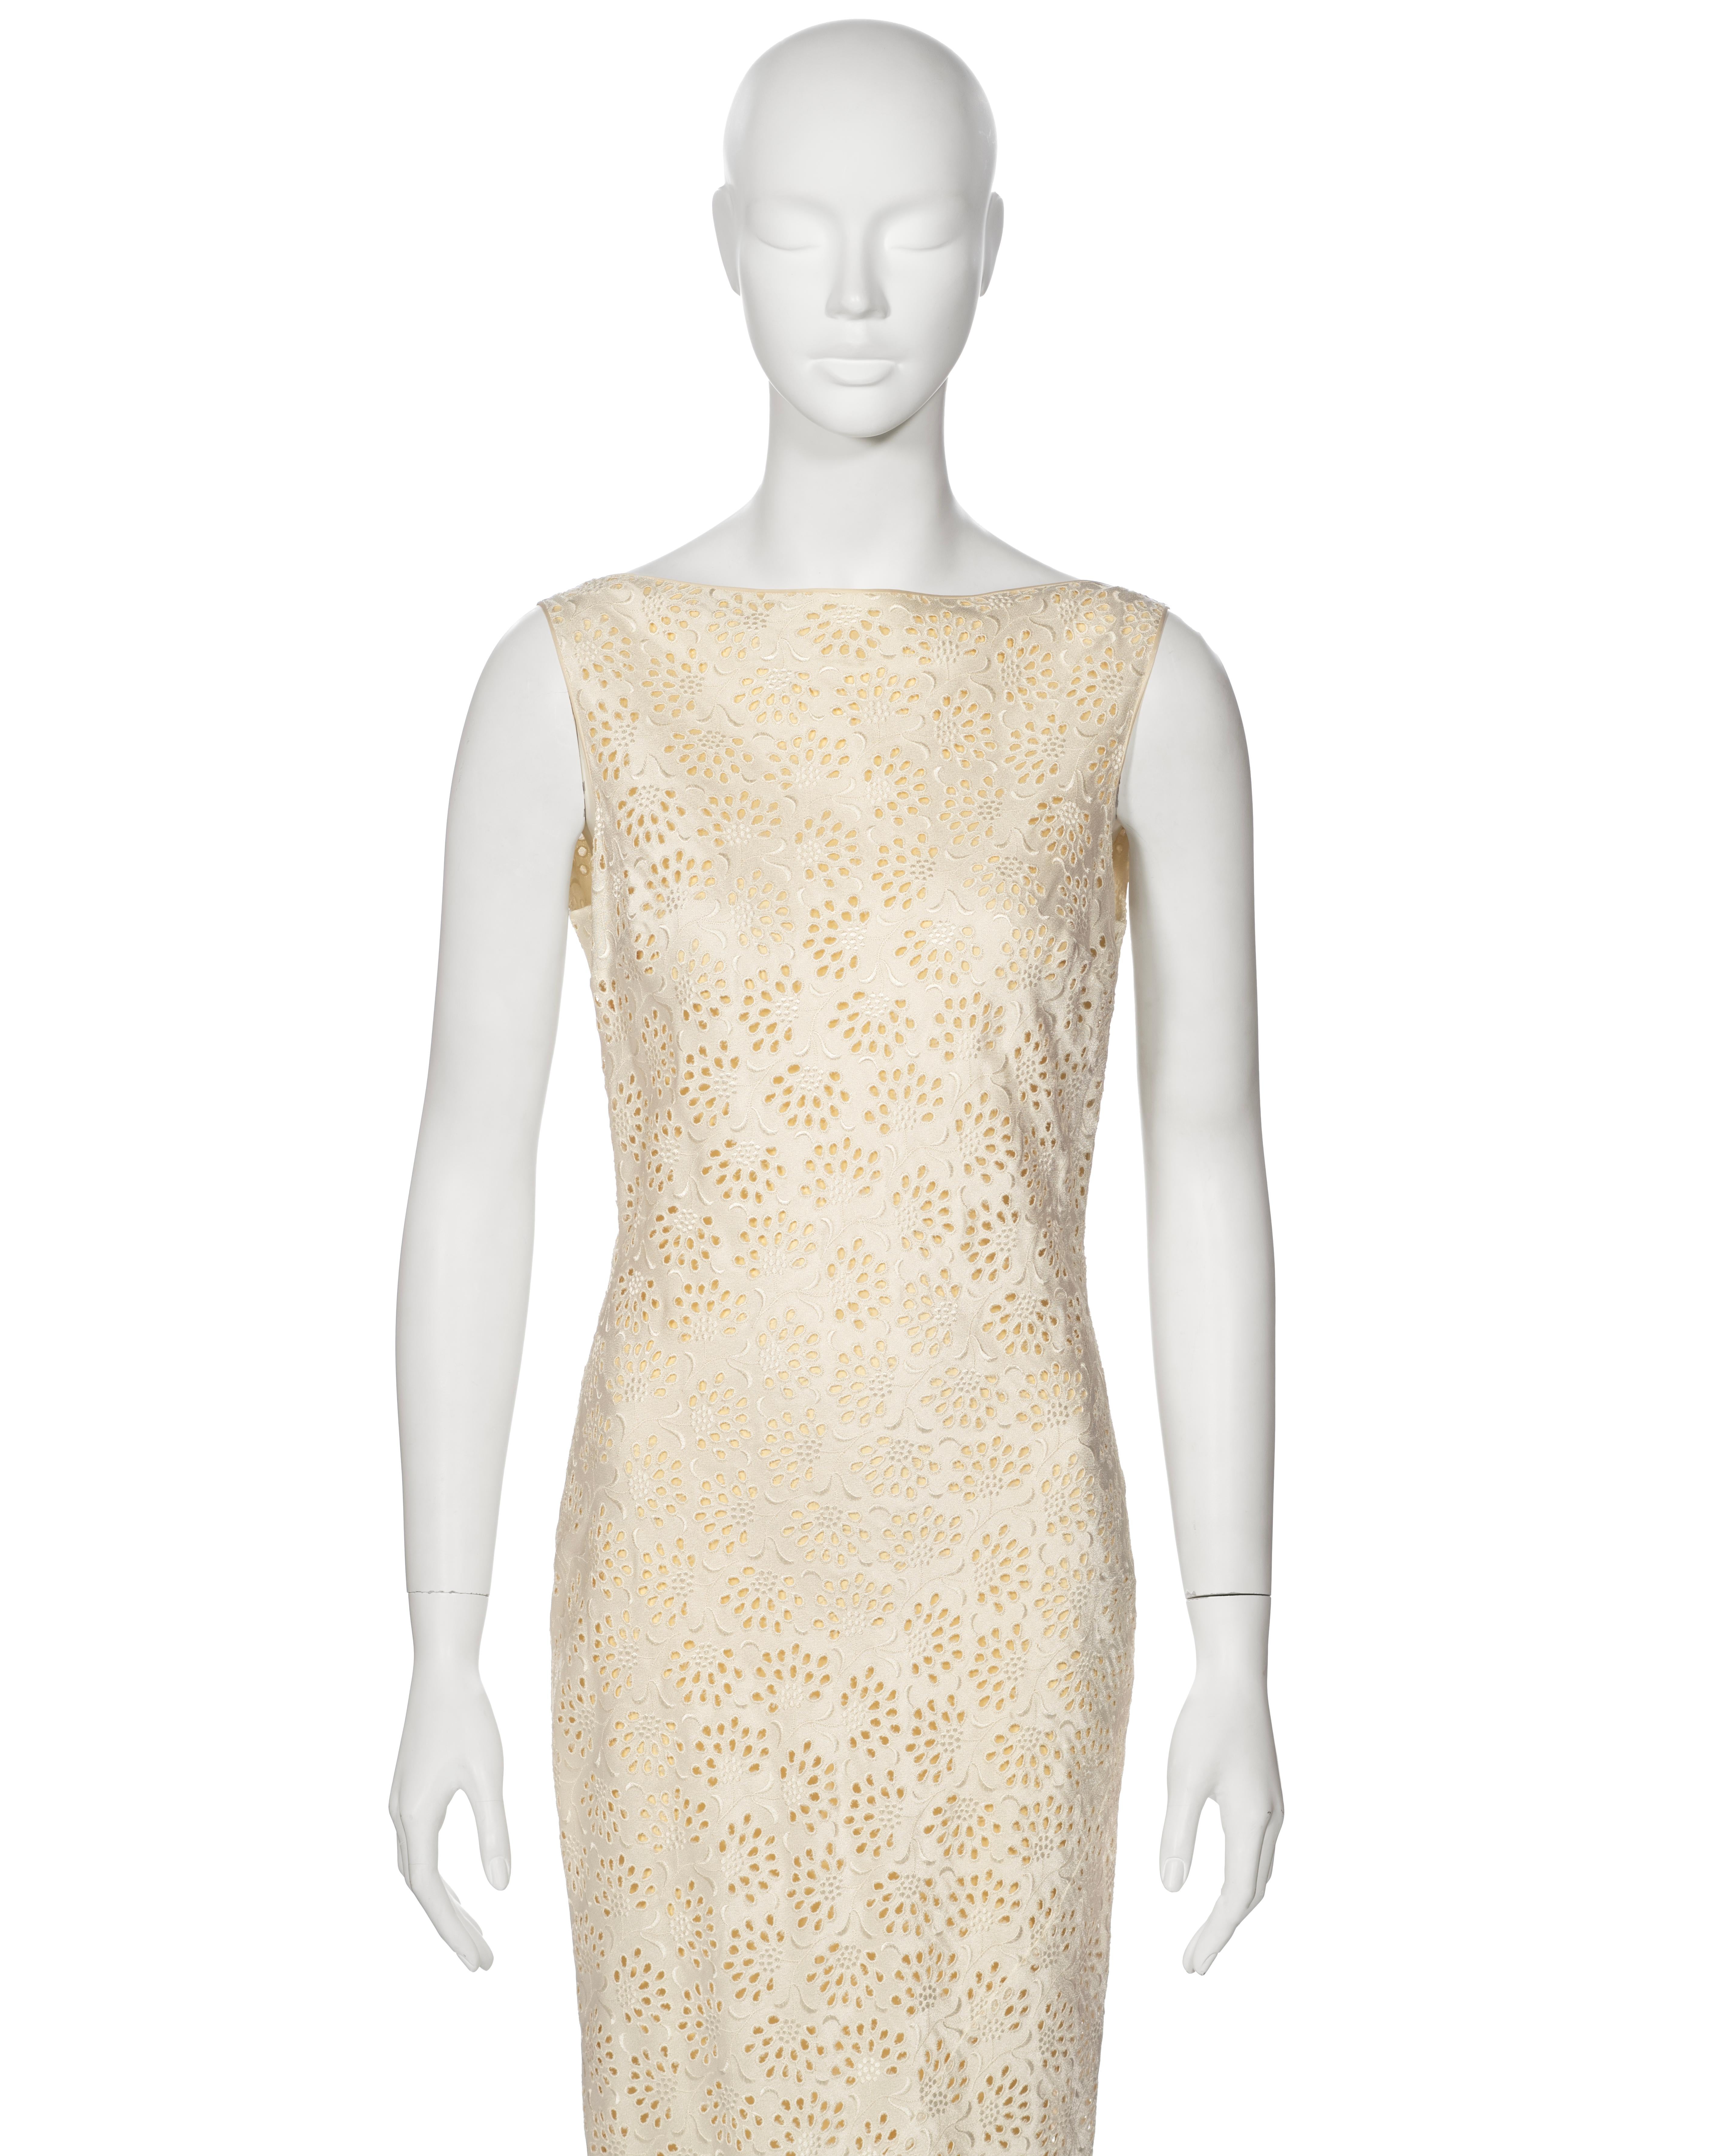 John Galliano 'L'Ecole de Danse' Ivory Satin Cutwork Formal Dress, ss 1996 In Excellent Condition For Sale In London, GB